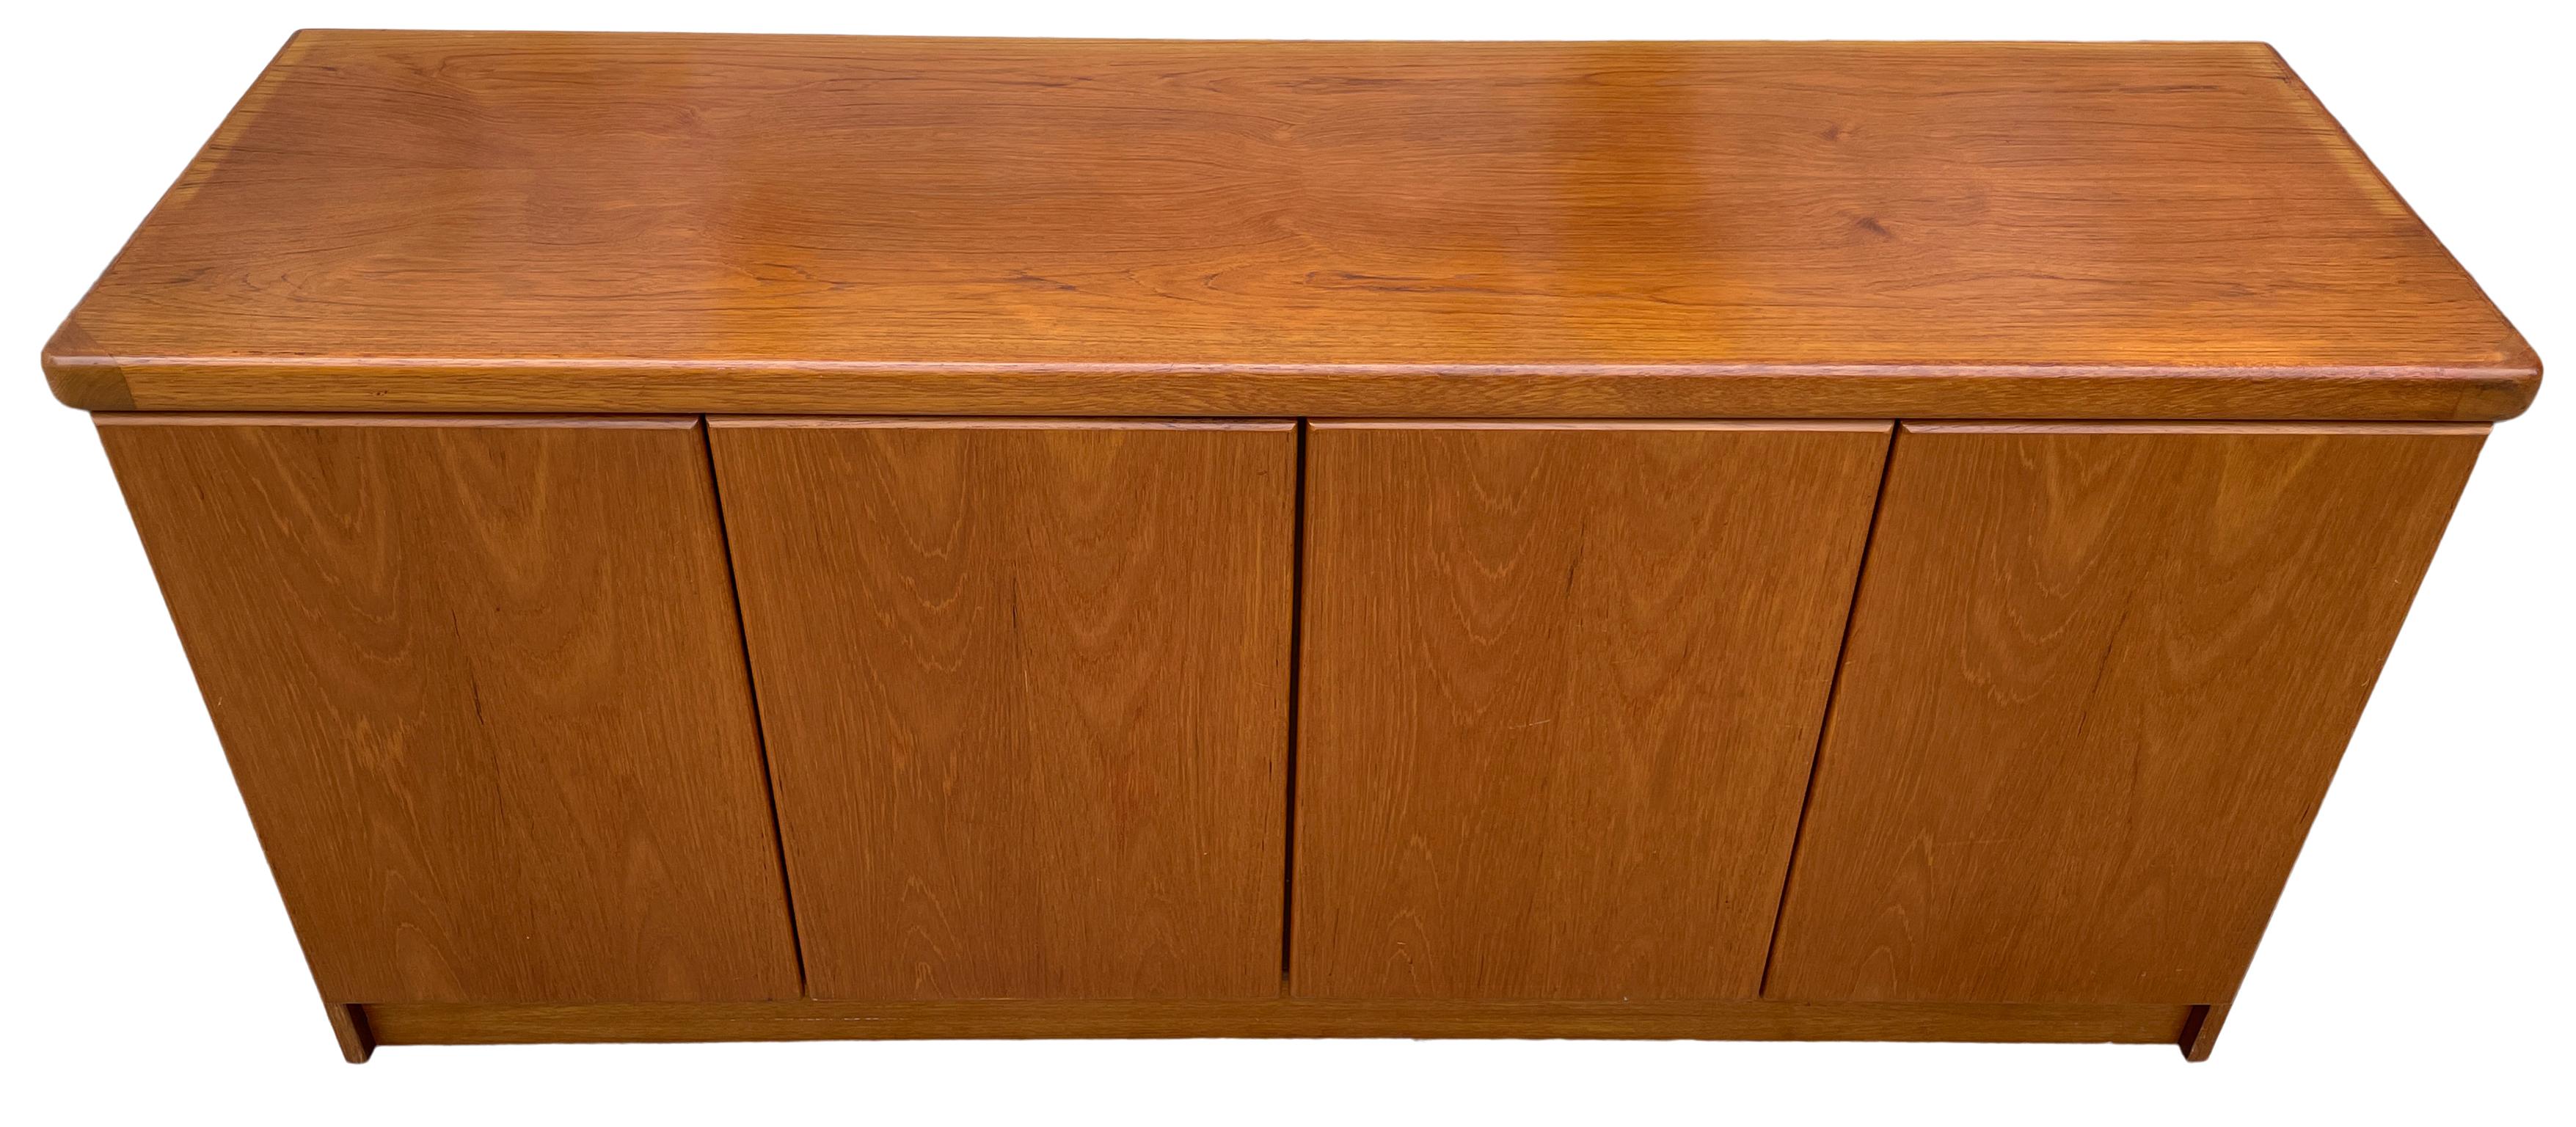 Midcentury long Danish modern light teak credenza sideboard with 4 doors and 2 drawers also has 3 adjustable shelves. Very clean teak wood credenza with sculpted teak doors. Very clean midcentury Danish sideboard. Great looking all drawers are clean